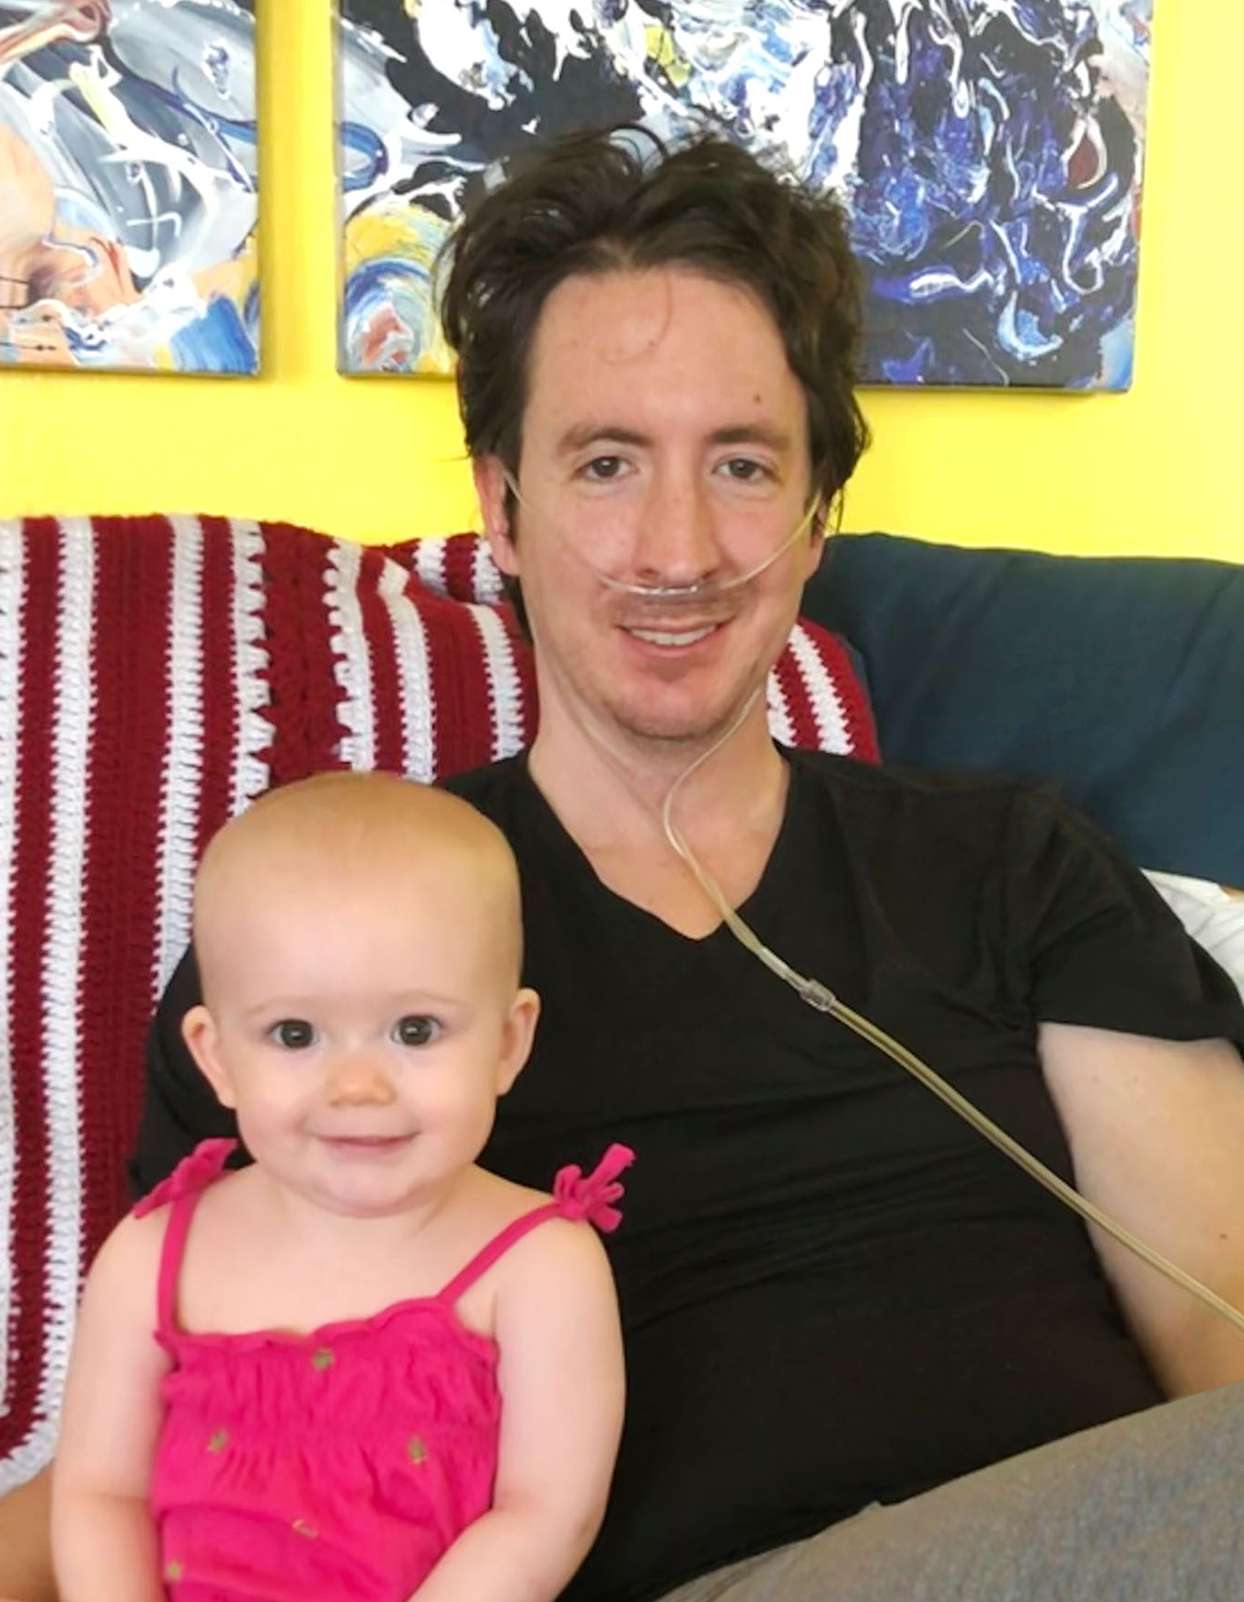 father with oxygen smiling on couch with toddler daughter